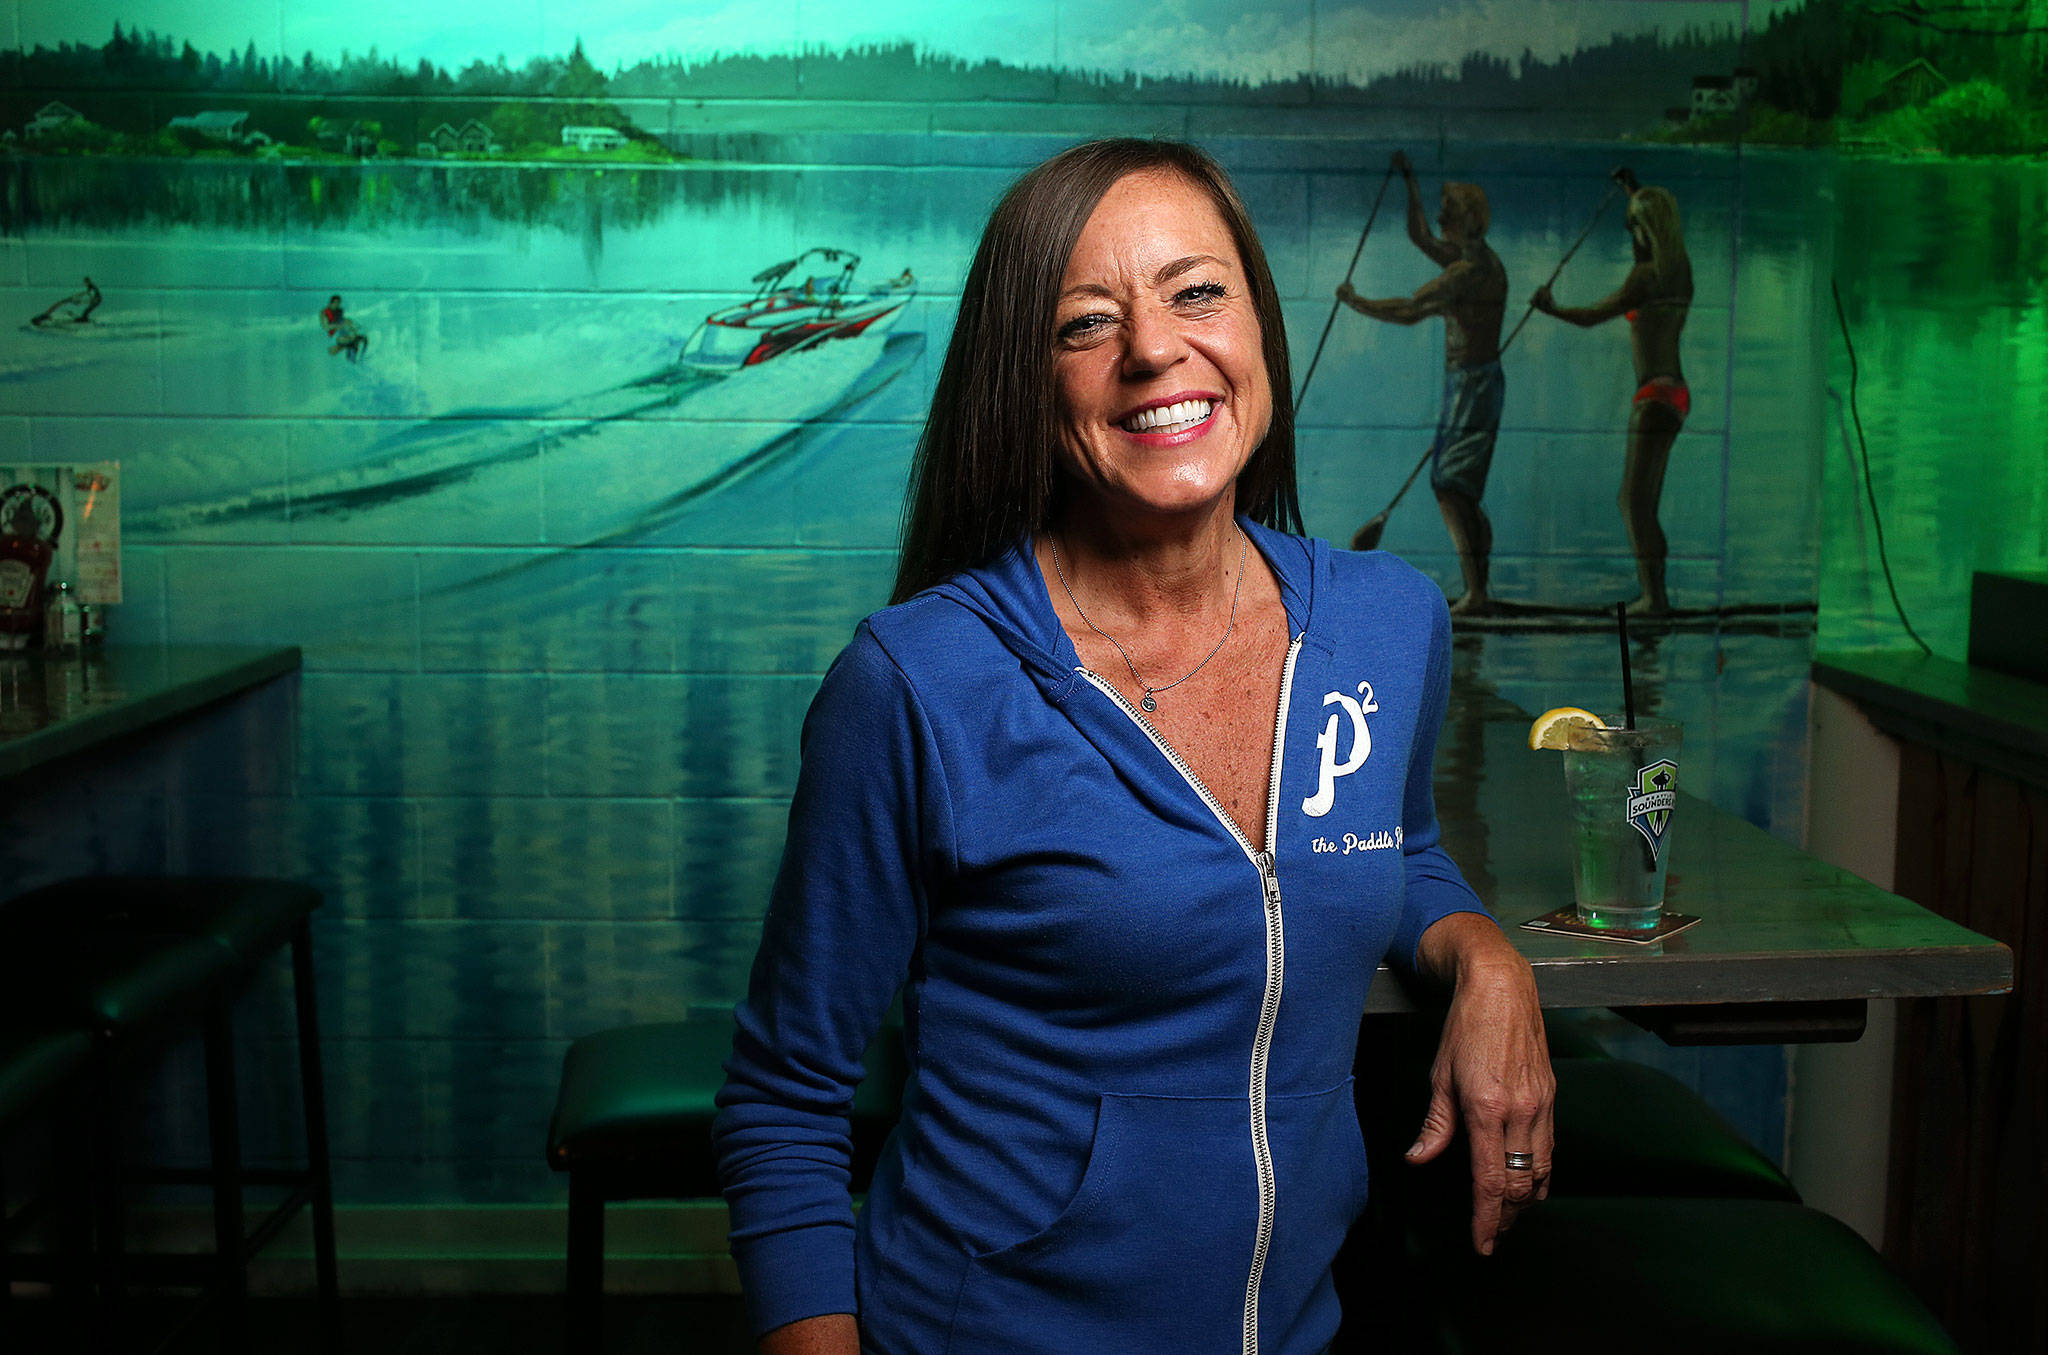 Deanna VanderVate, 48, is a bartender at The Paddle Pub in Stanwood. She calls it her second home. (Andy Bronson / The Herald)